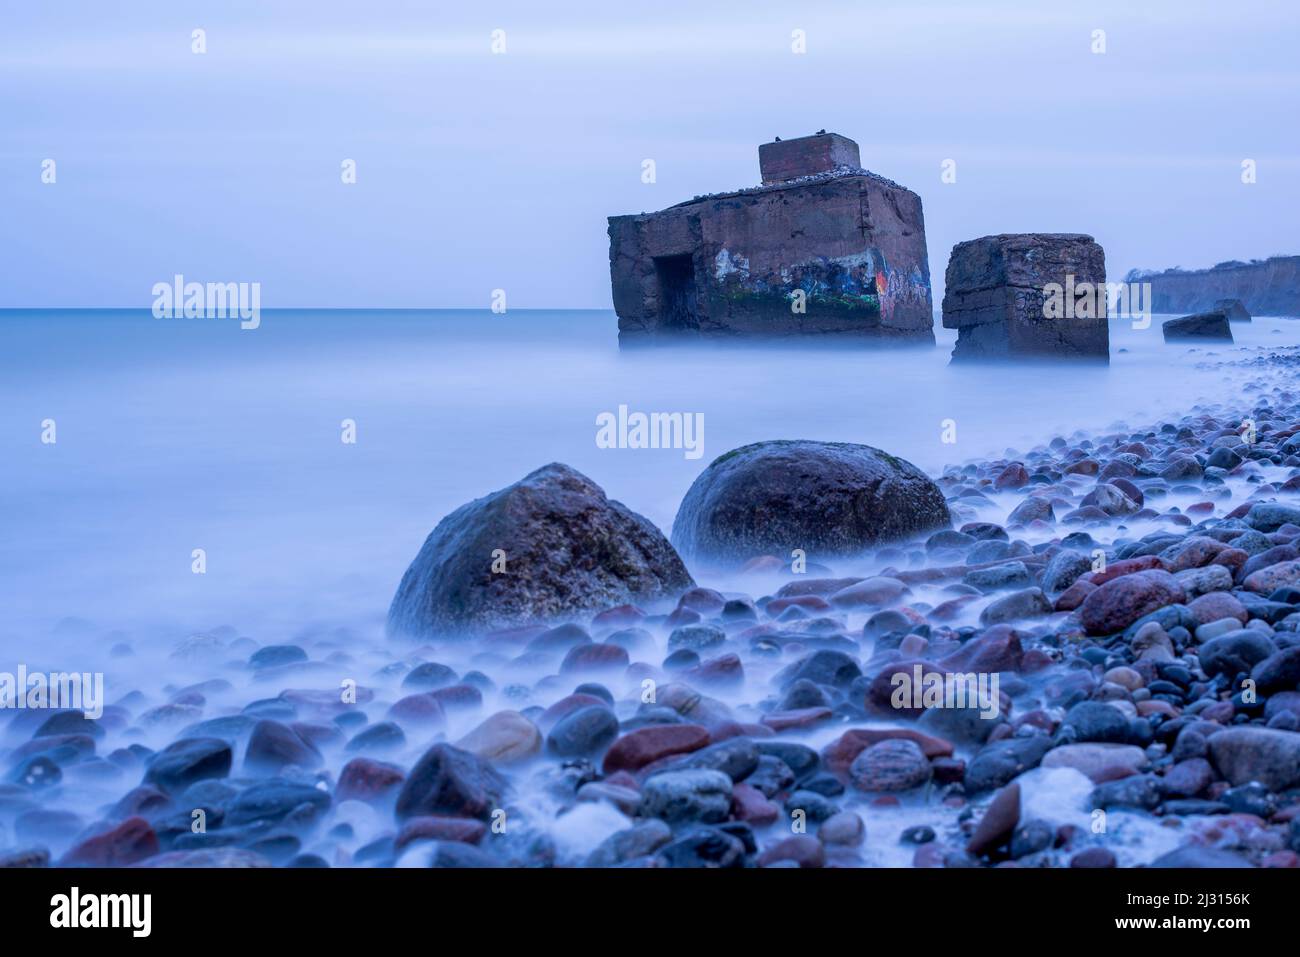 Old bunker in the sea, steep coast between Ahrenshoop and Wustrow, Fischland-Darss-Zingst Baltic Sea peninsula, Mecklenburg-West Pomerania, Germany Stock Photo